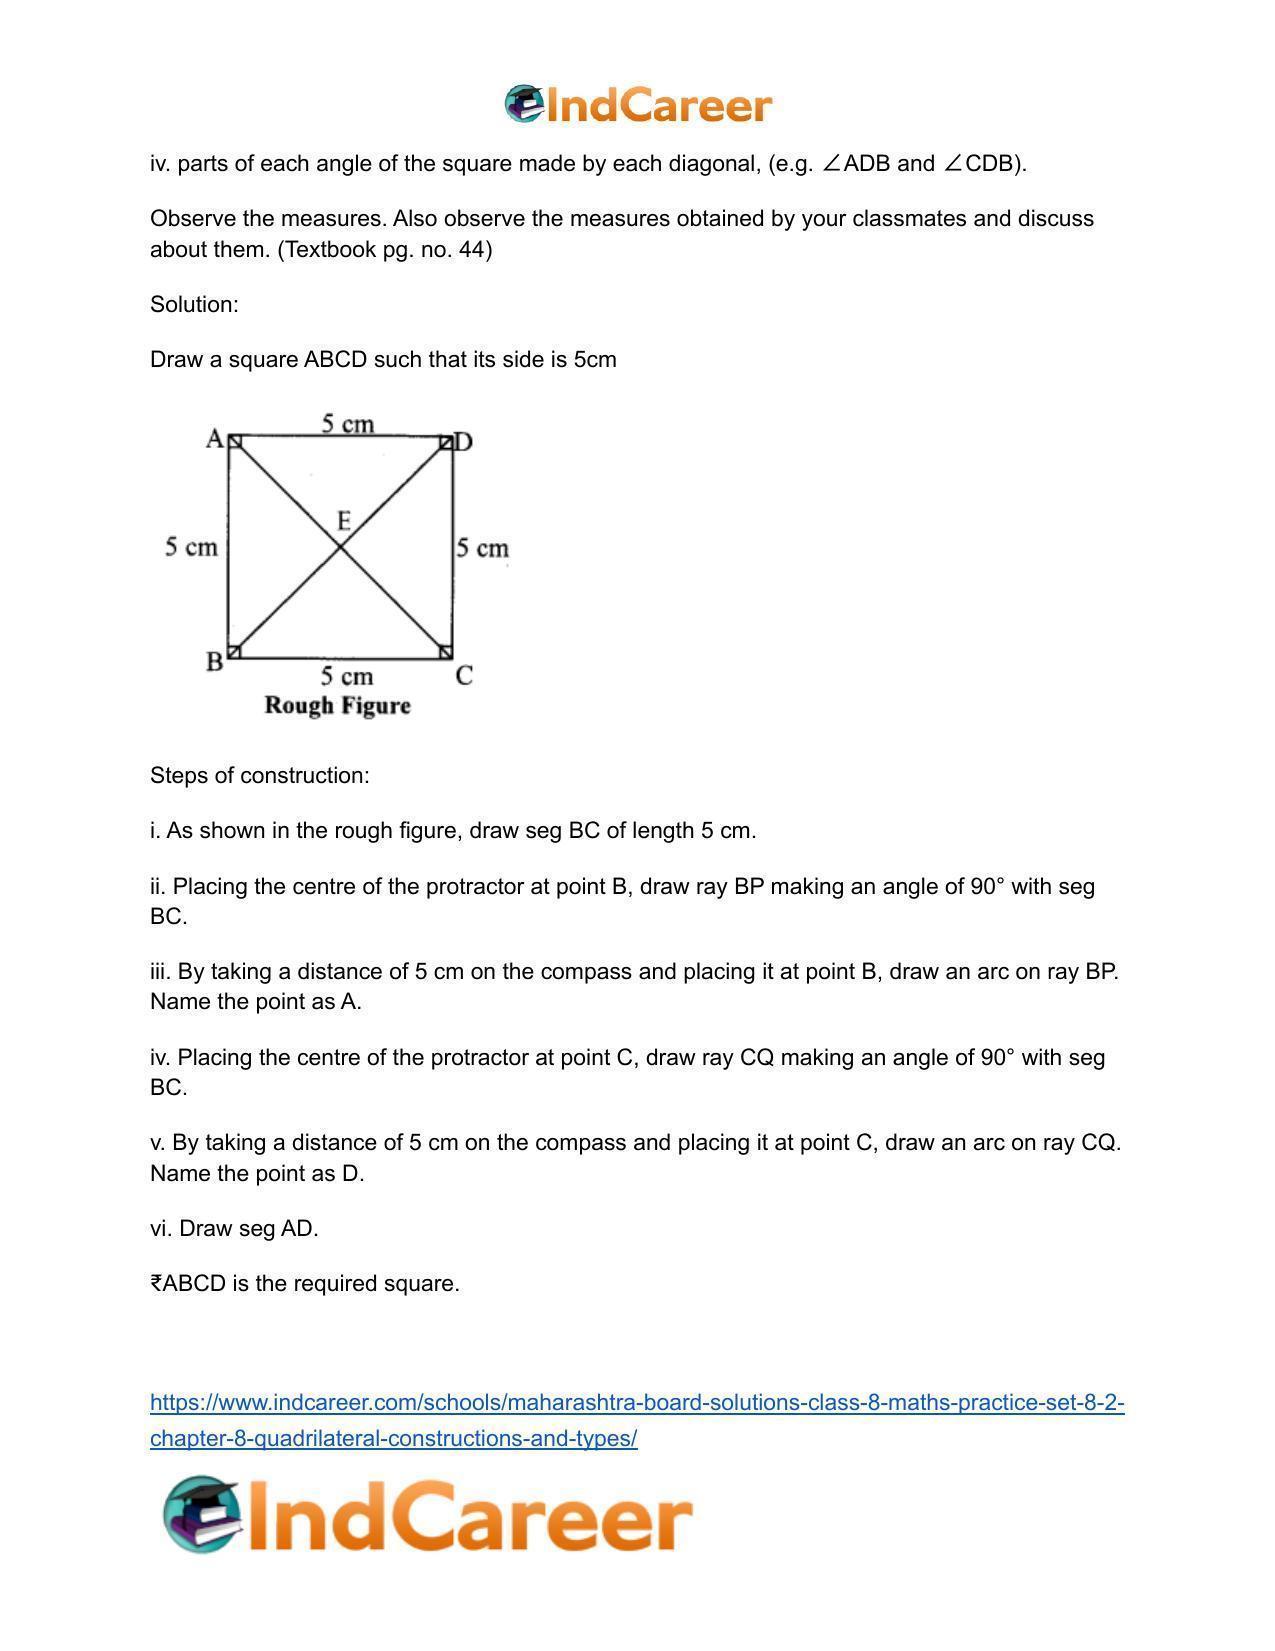 Maharashtra Board Solutions Class 8-Maths (Practice Set 8.2): Chapter 8- Quadrilateral: Constructions and Types - Page 13